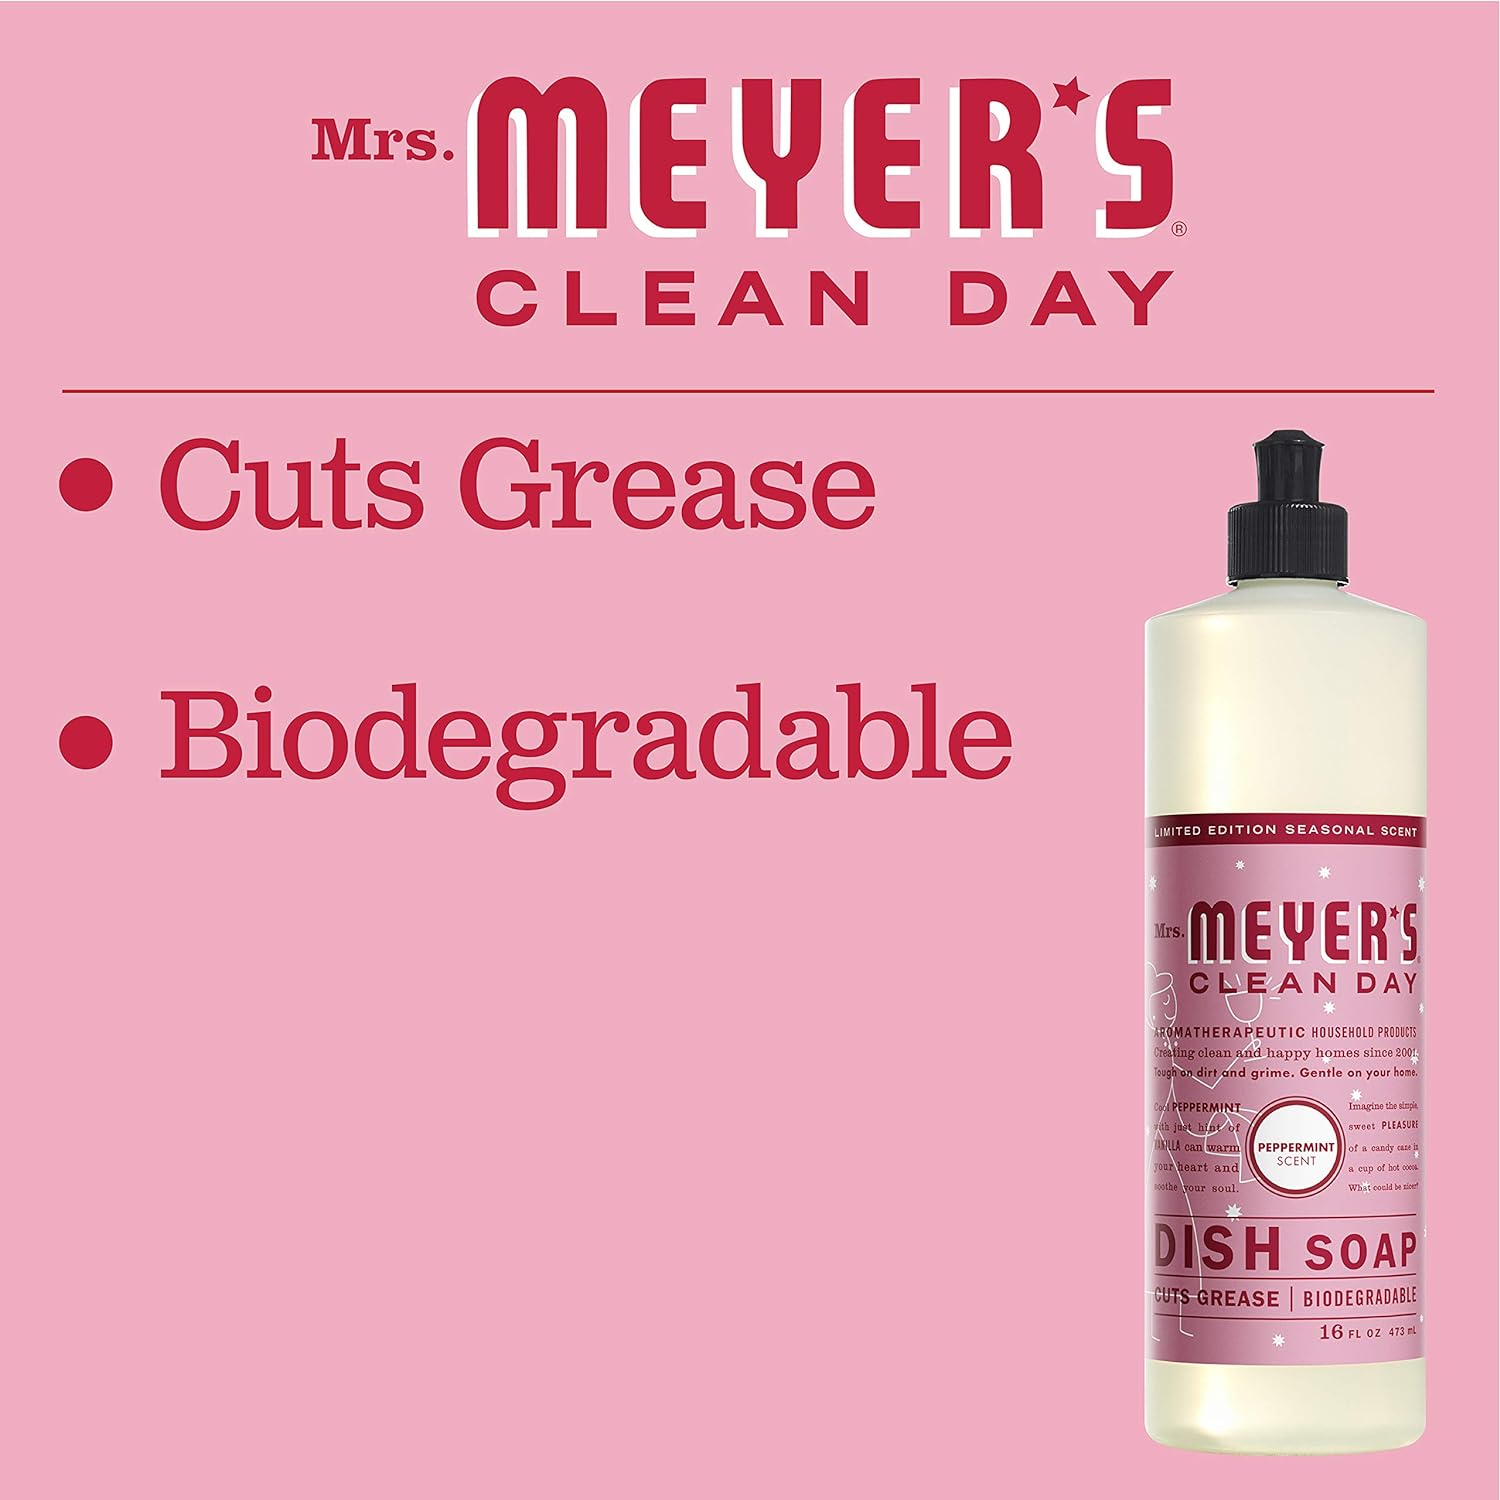 MRS. MEYER'S CLEAN DAY Liquid Dish Soap, Biodegradable Formula, Limited Edition Peppermint, 16 fl. oz : Health & Household